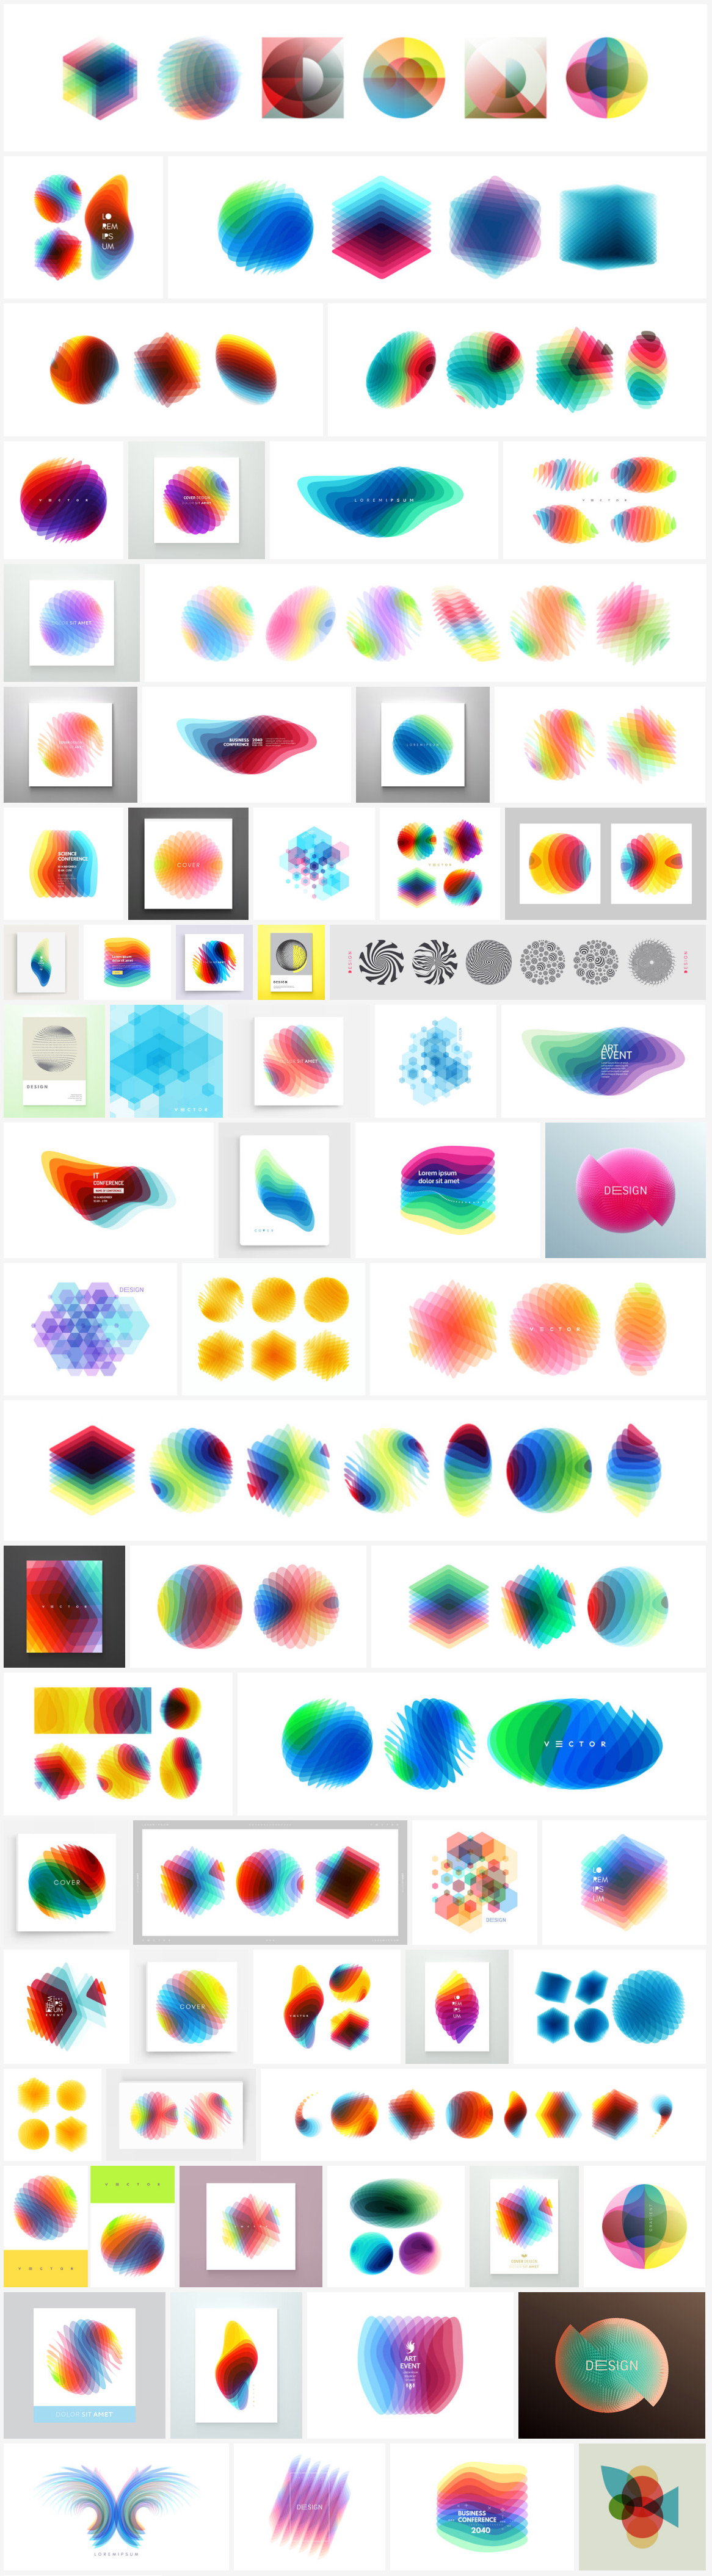 Abstract geometric vector graphics made of various overlapping design elements.